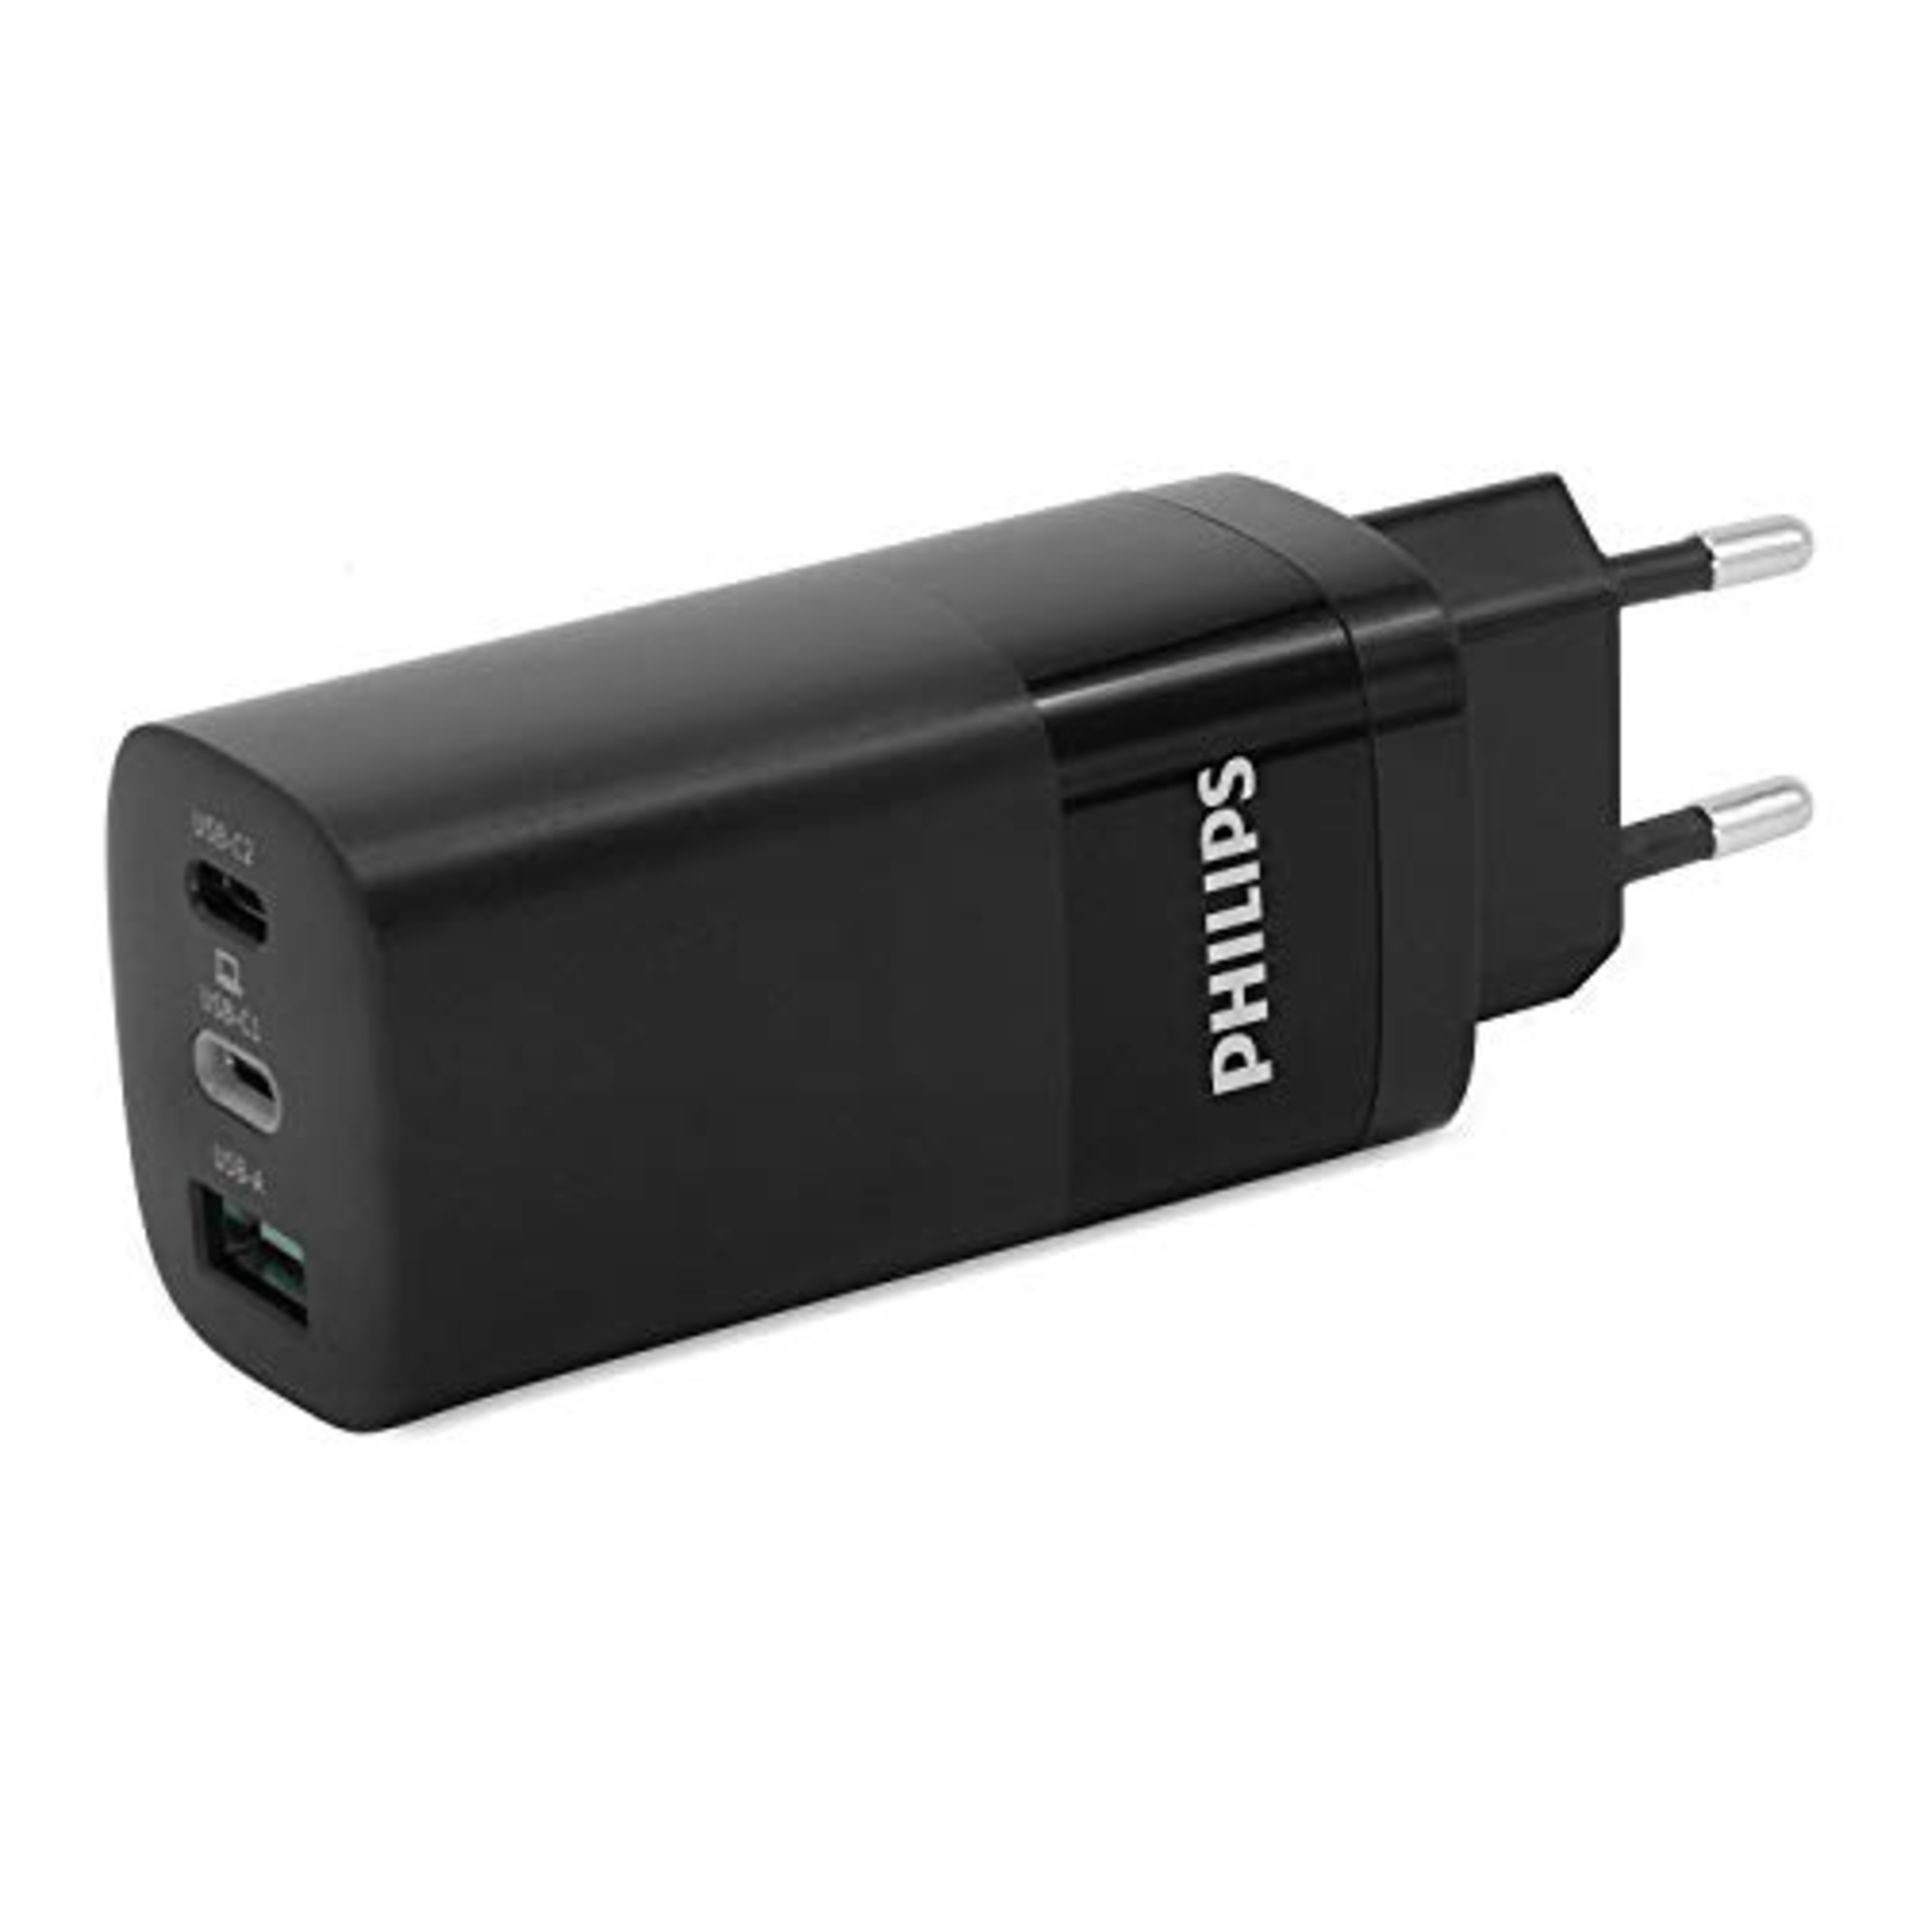 PHILIPS DLP2681/12 - Charger with 65W output power - USB-A and USB-C dual output - Bla